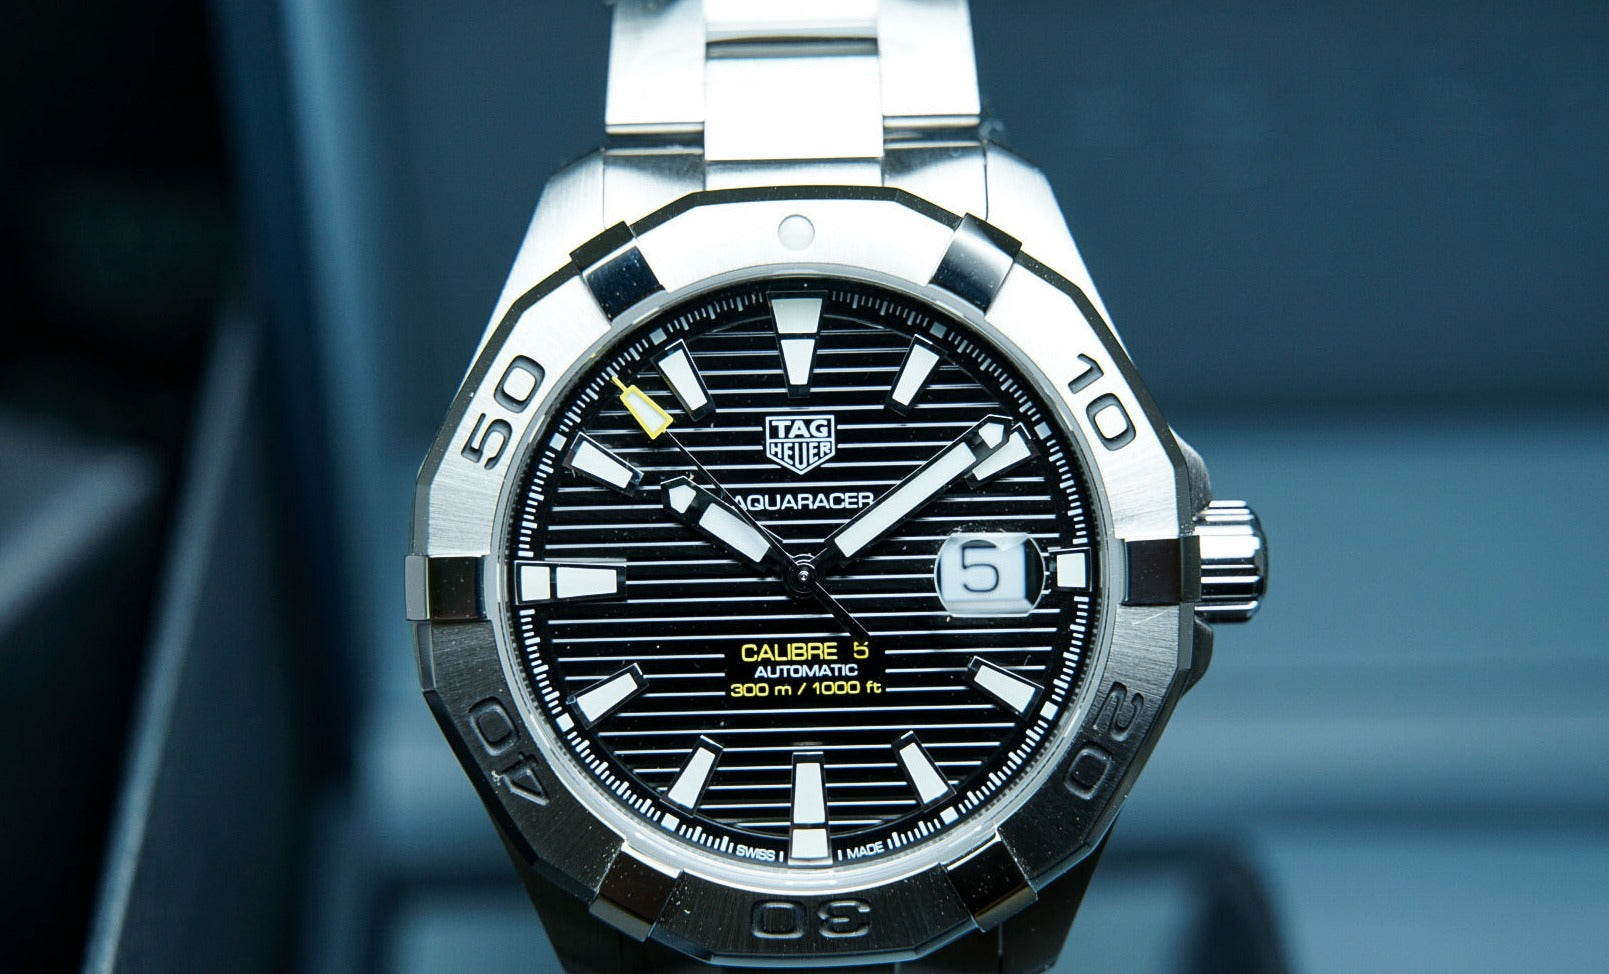 Tag Heuer Aquaracer Automatic Black Dial Silver Steel Strap Watch for Men - WAY2010.BA0927